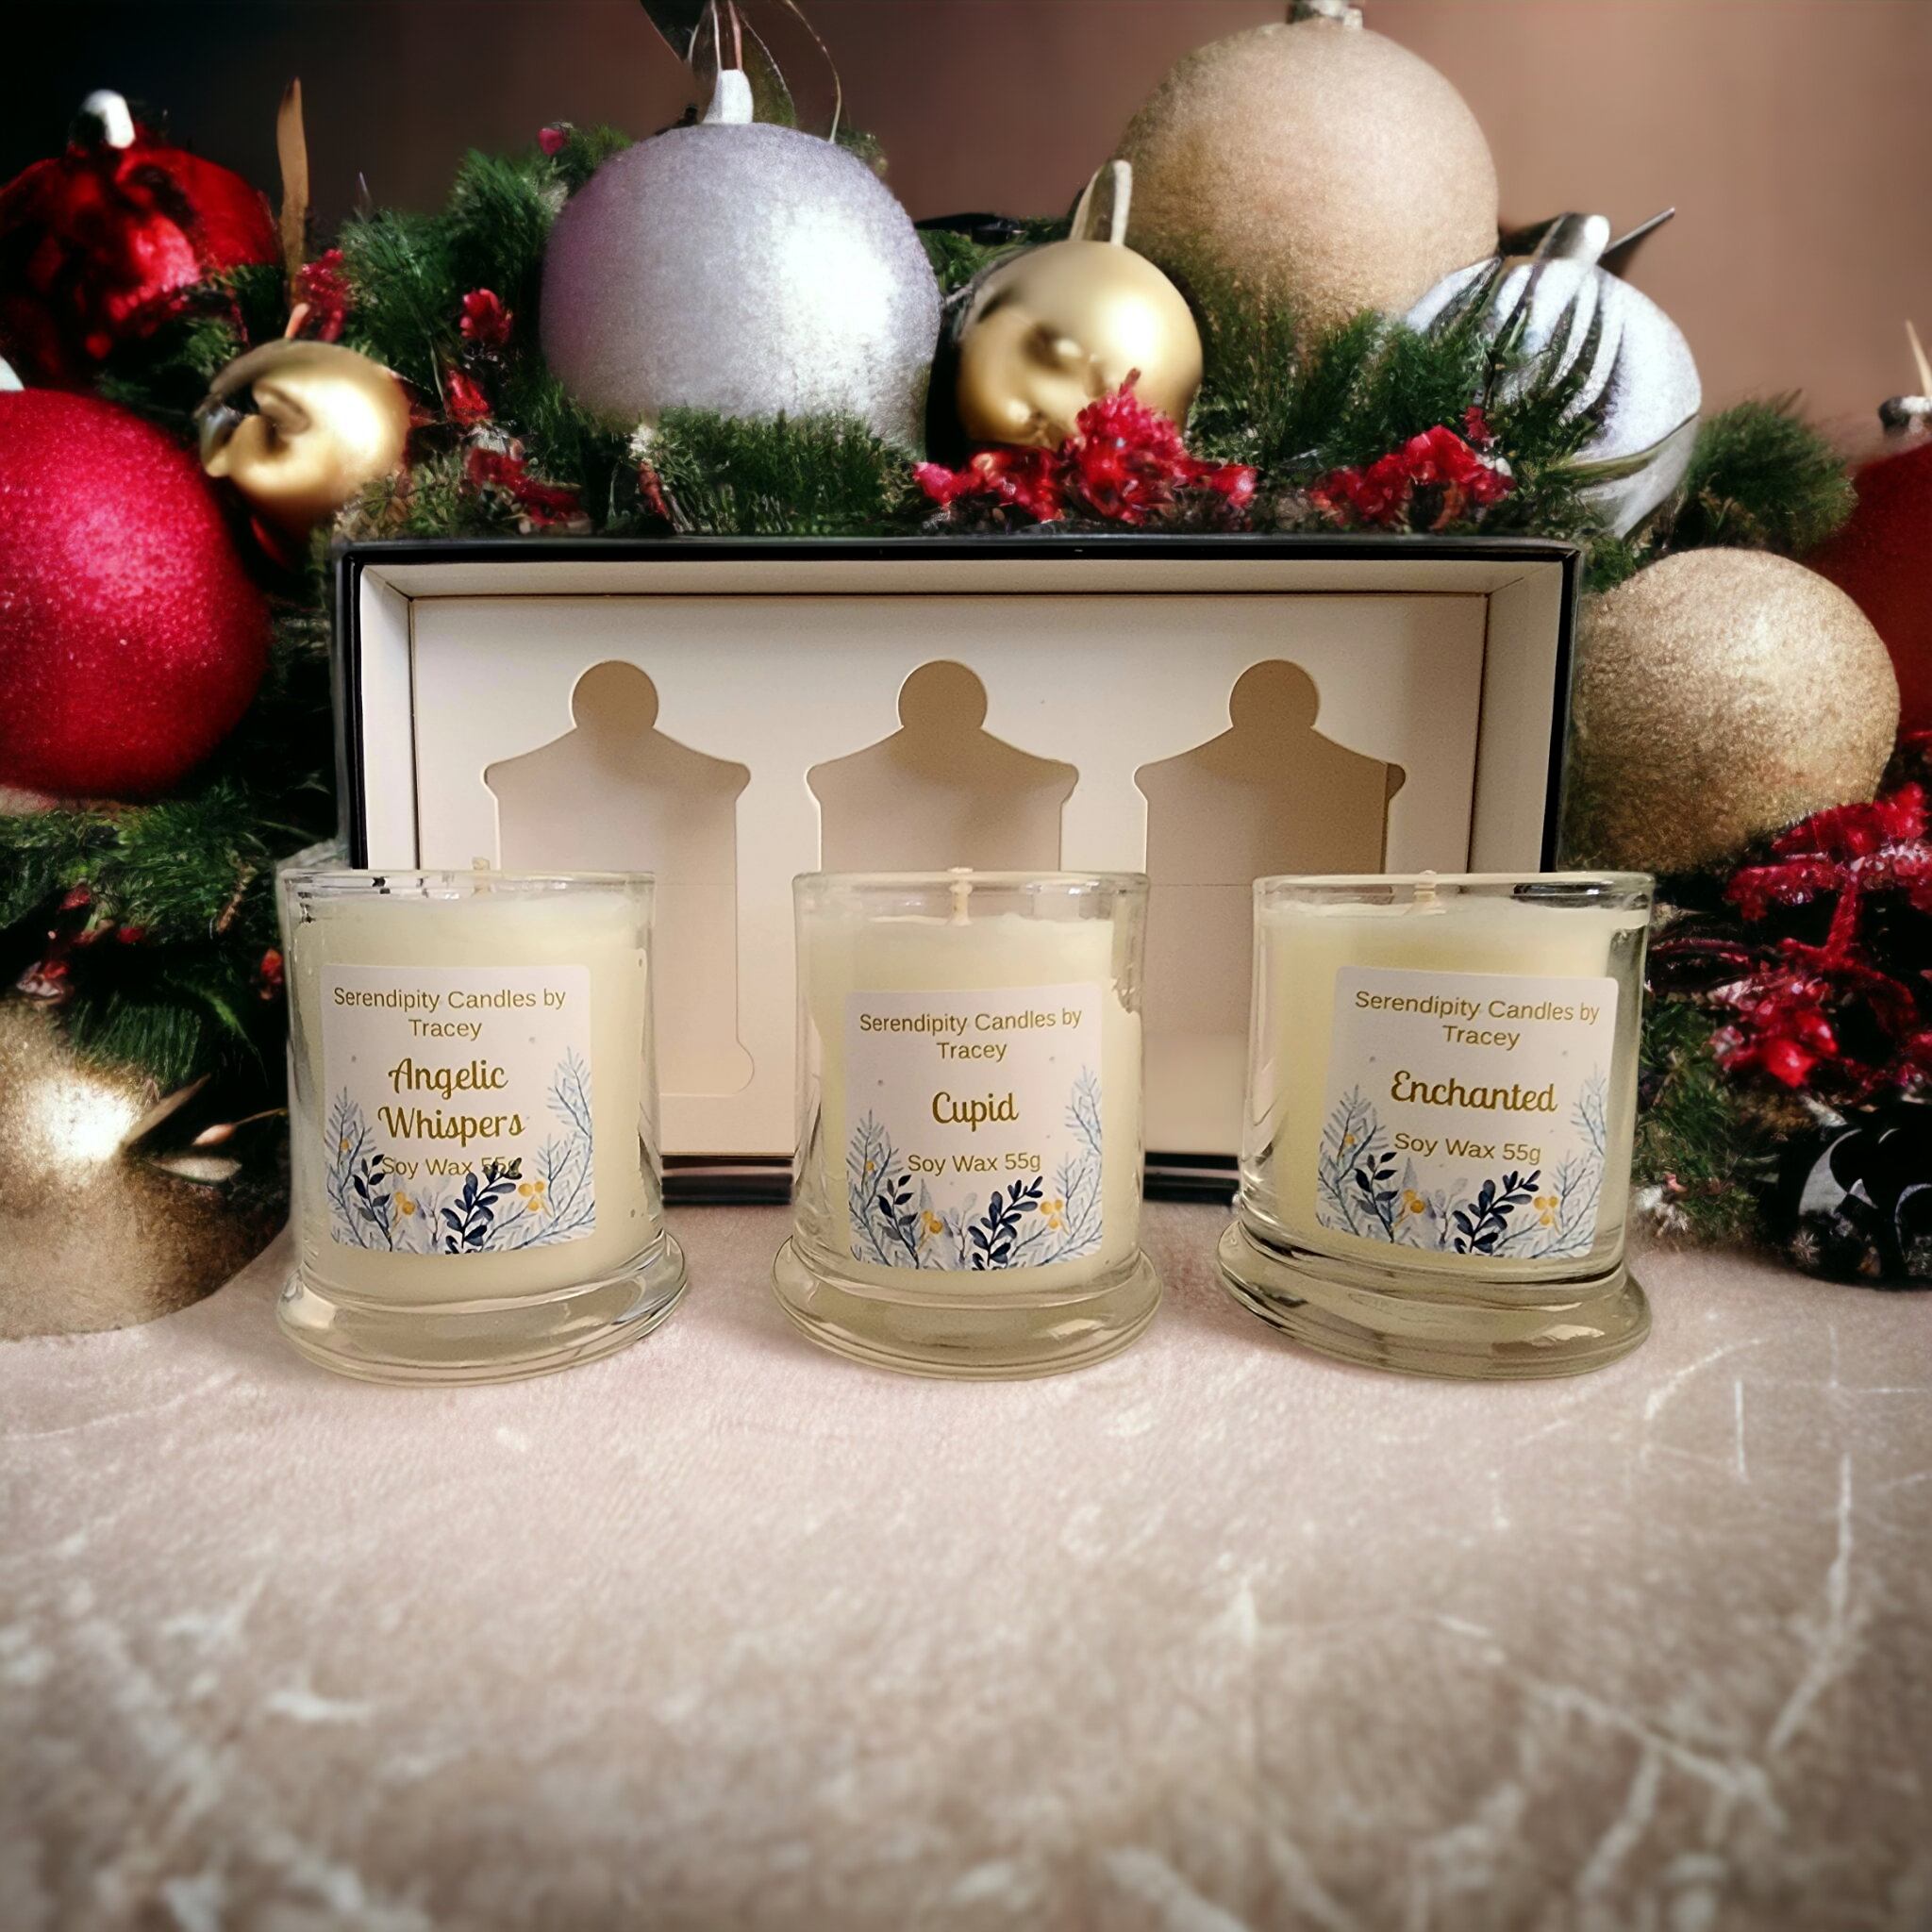 Echanted Scented Candle Gift Set